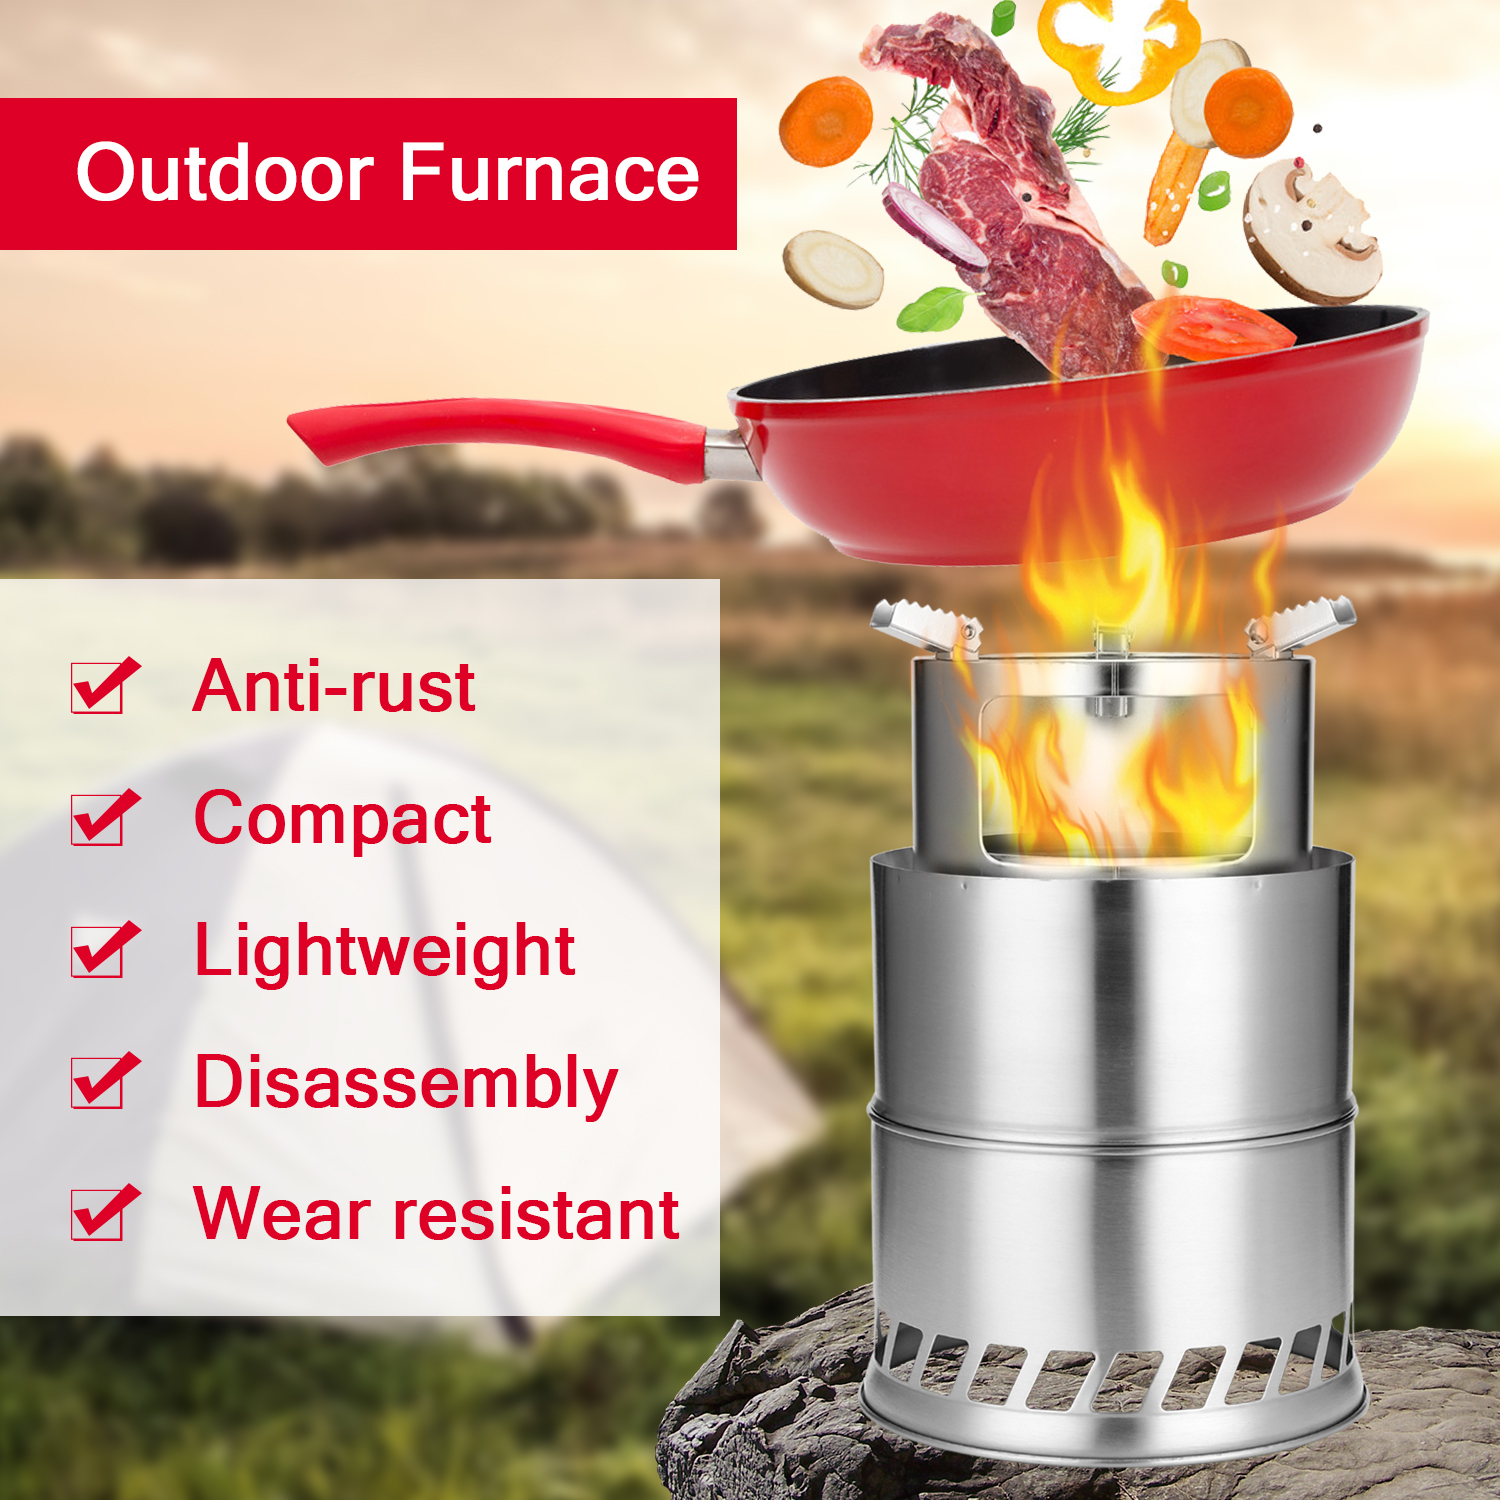 Outdoor Portable Stove Windproof Wood Stoves Furnace Picnic Stainless Steel Stoves Barbecue Stoves For Hiking Camping Picnic